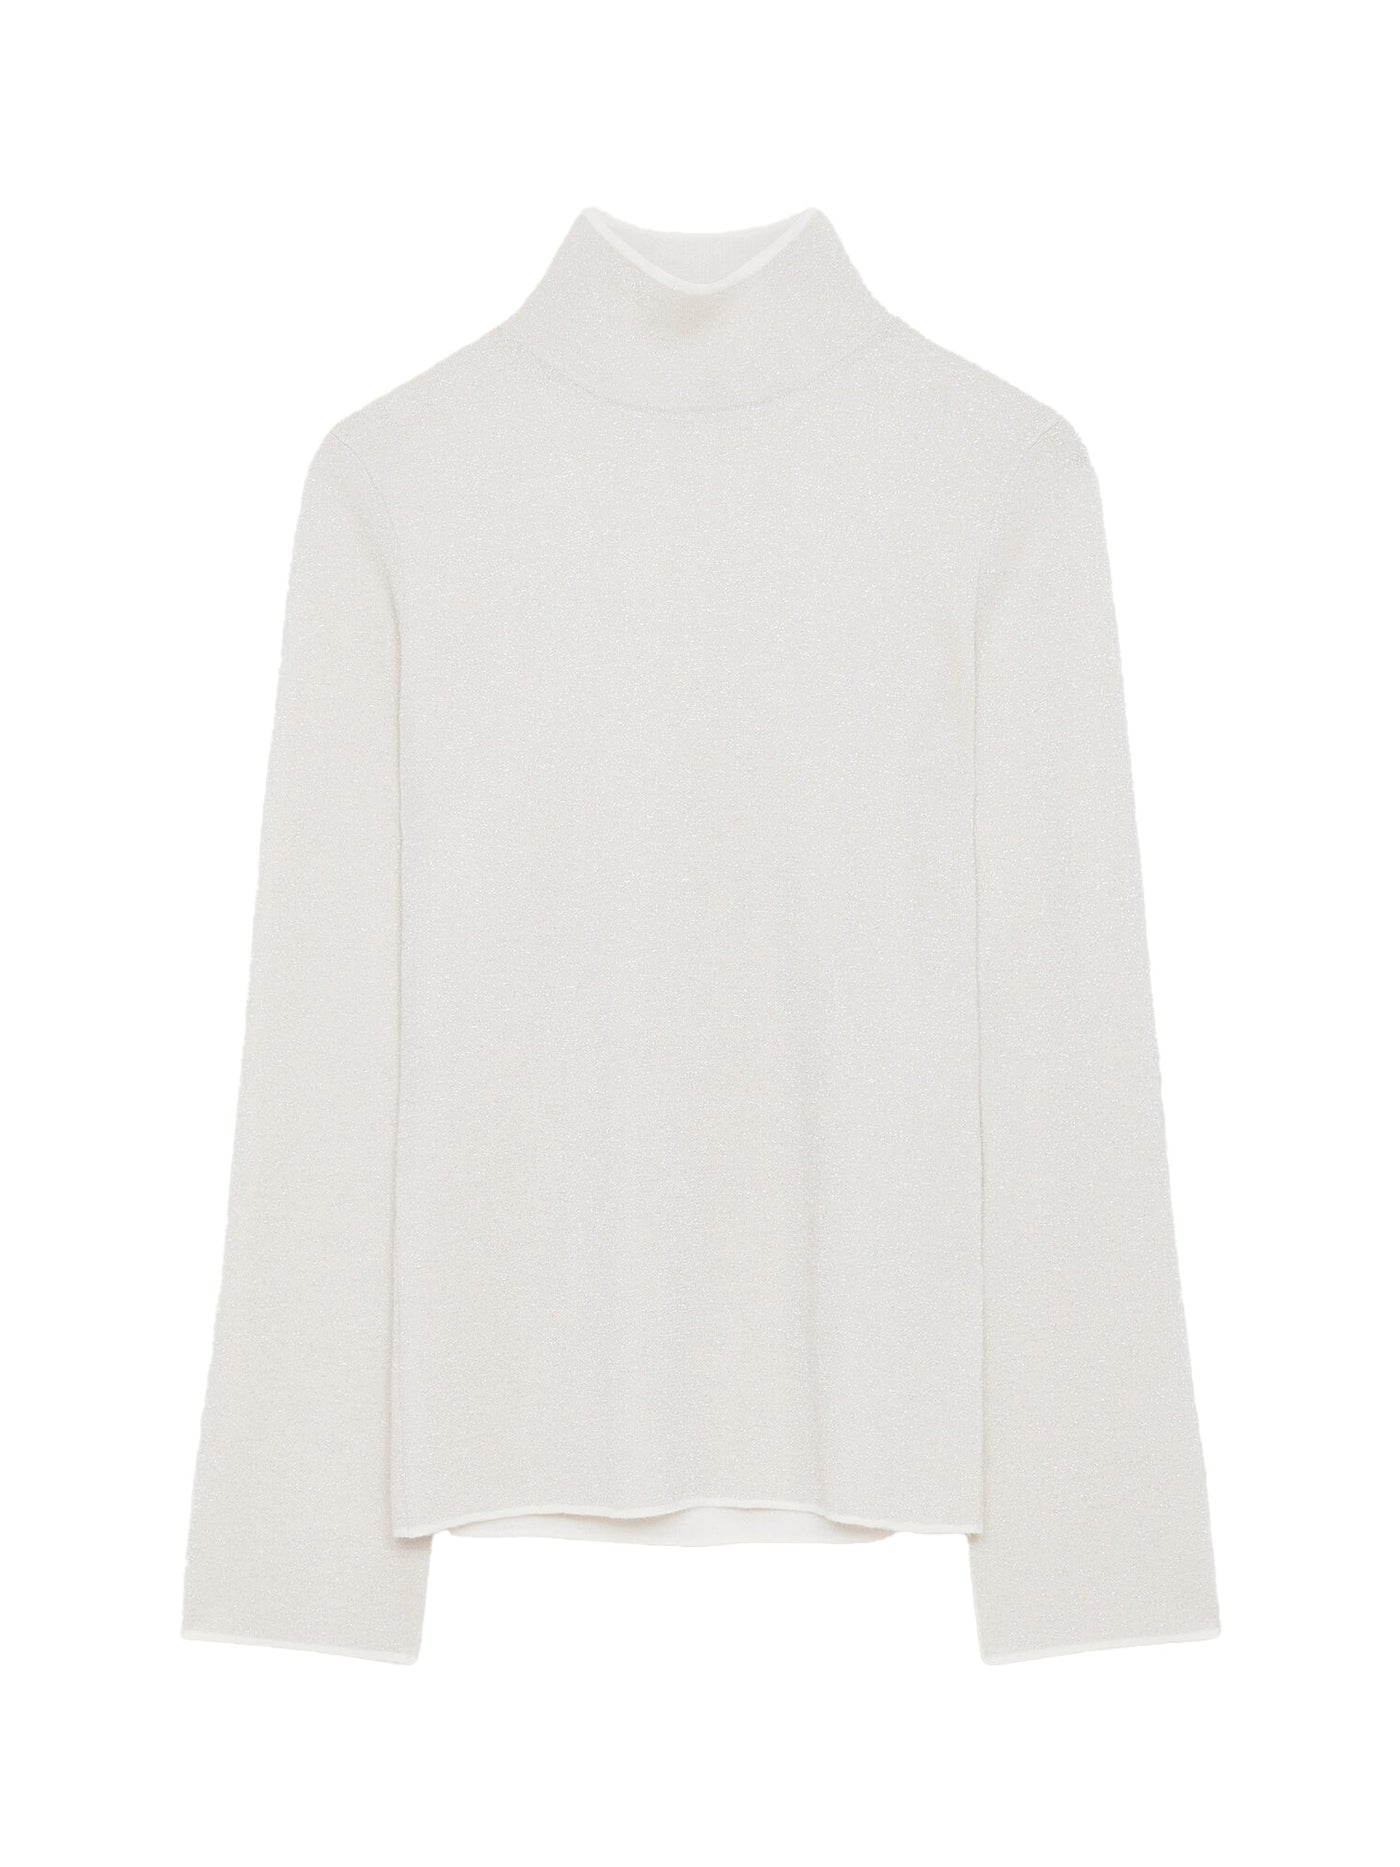 Double Face Lurex Merino Top in Ivory